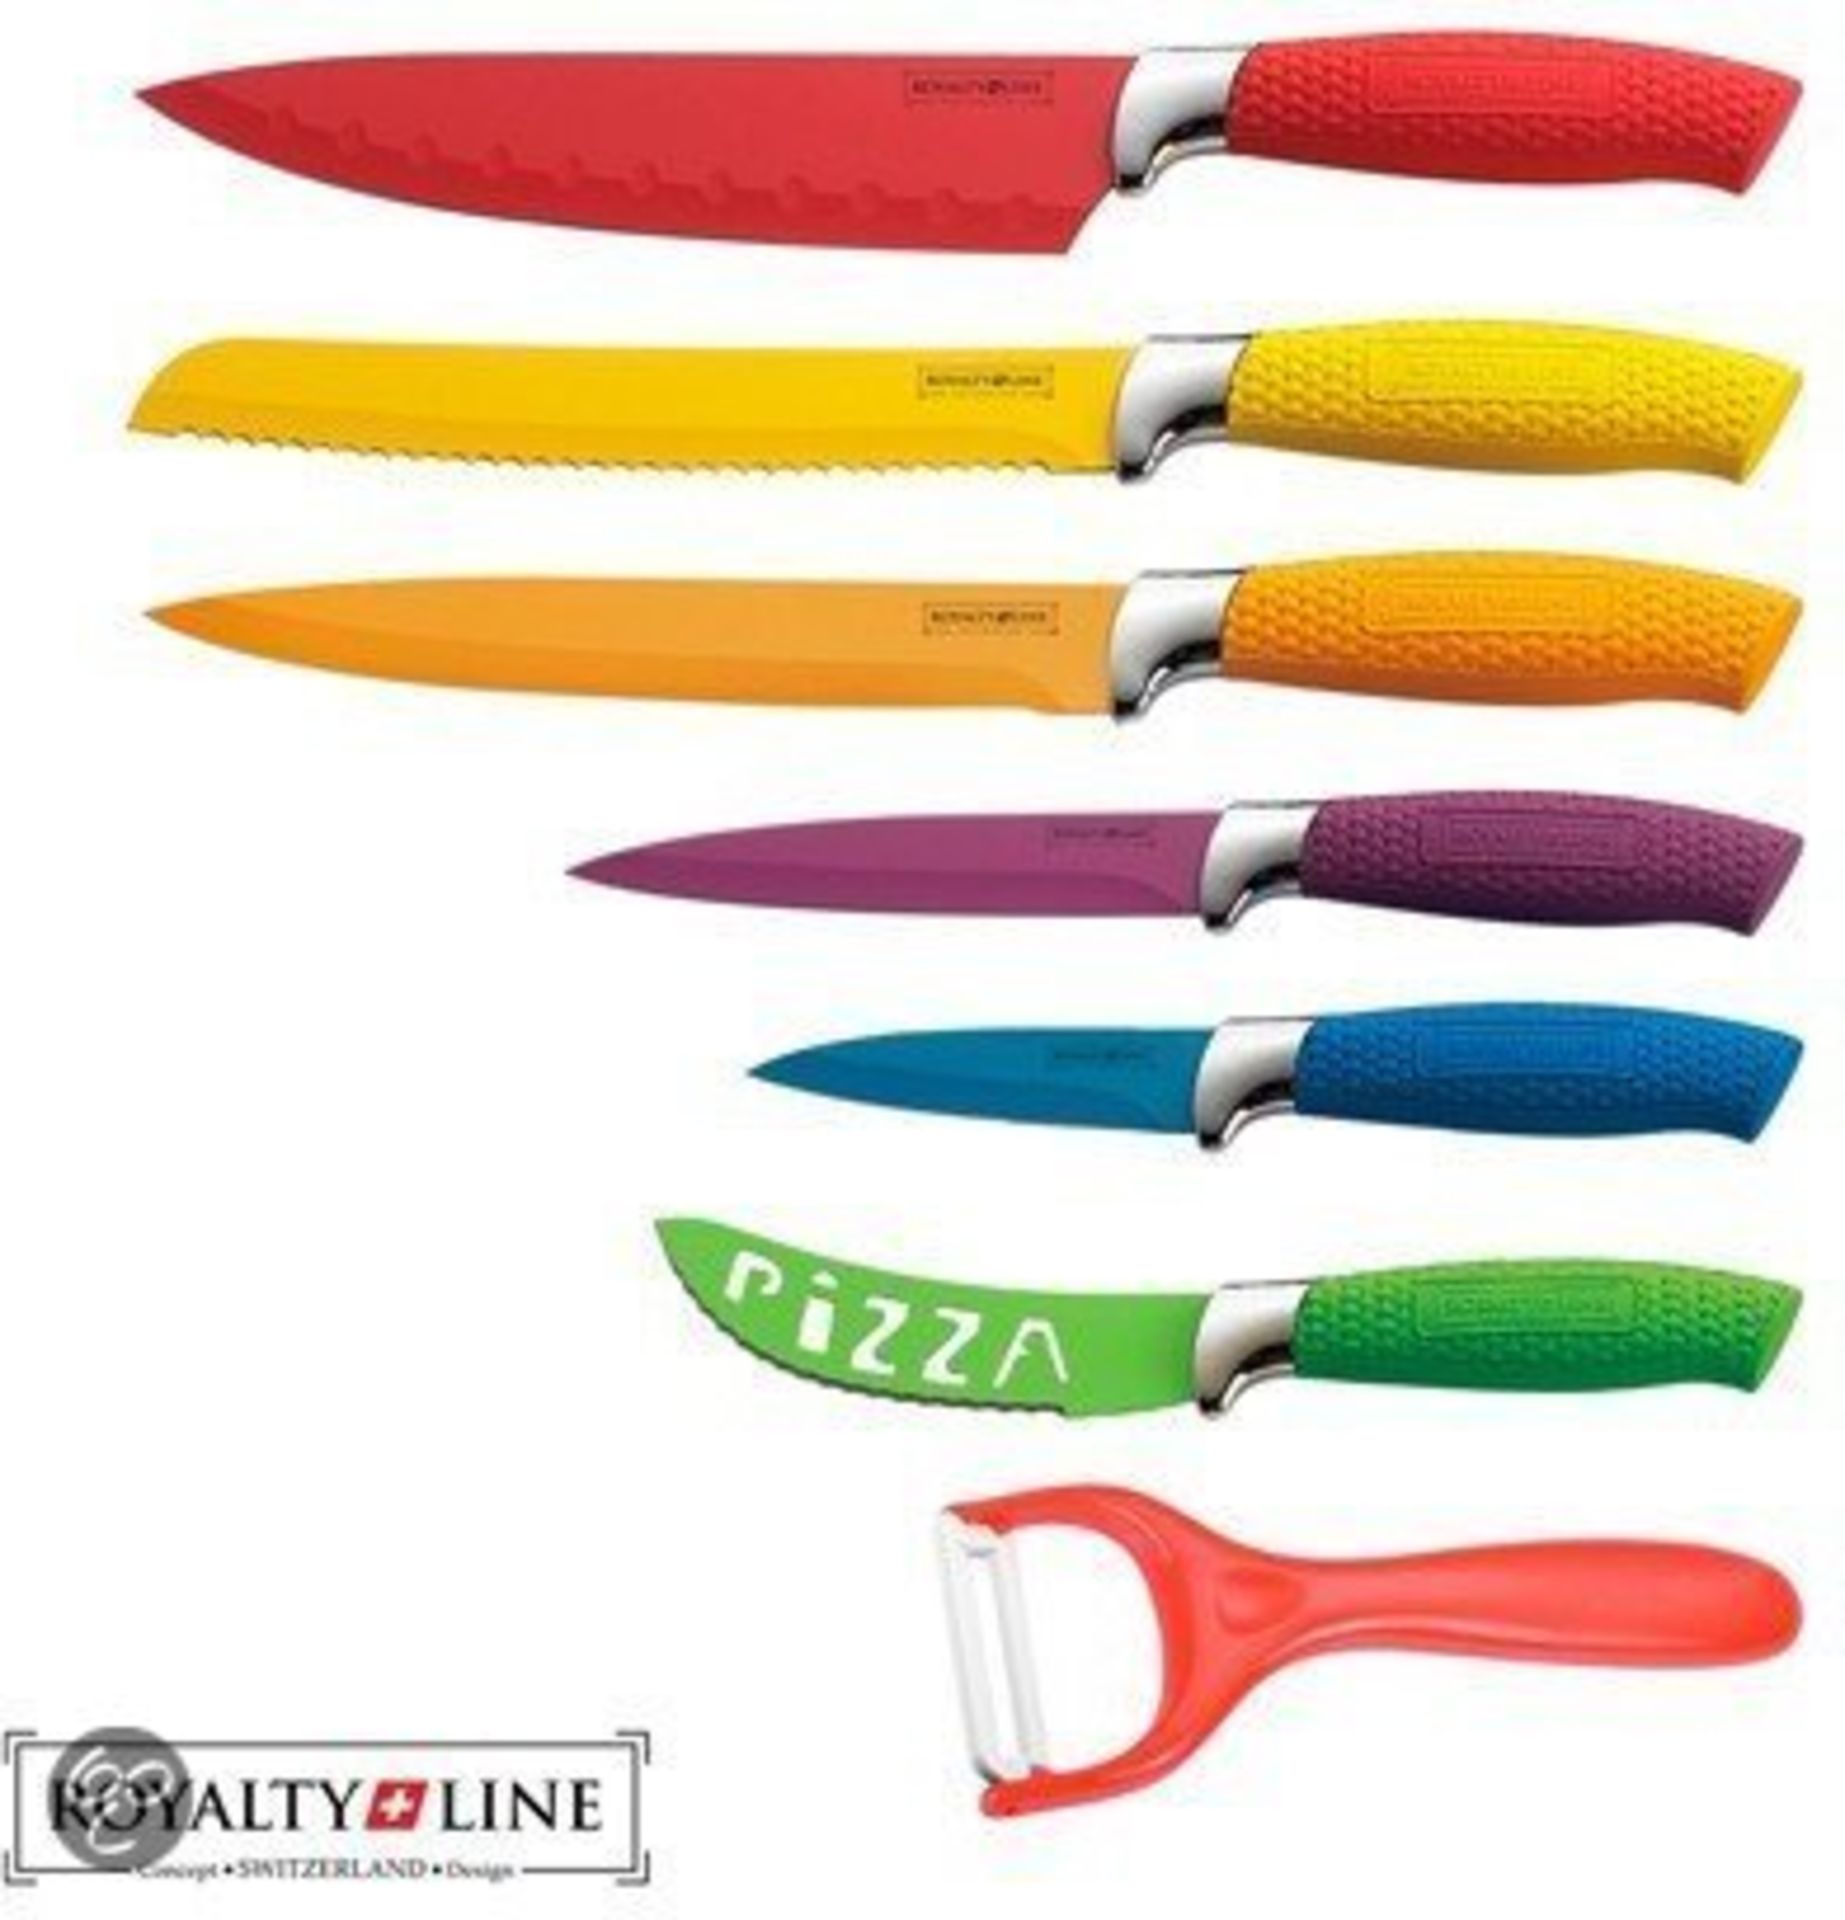 V Brand New Royalty coloured seven piece kitchen knife set RRP 149 euros in display box includes